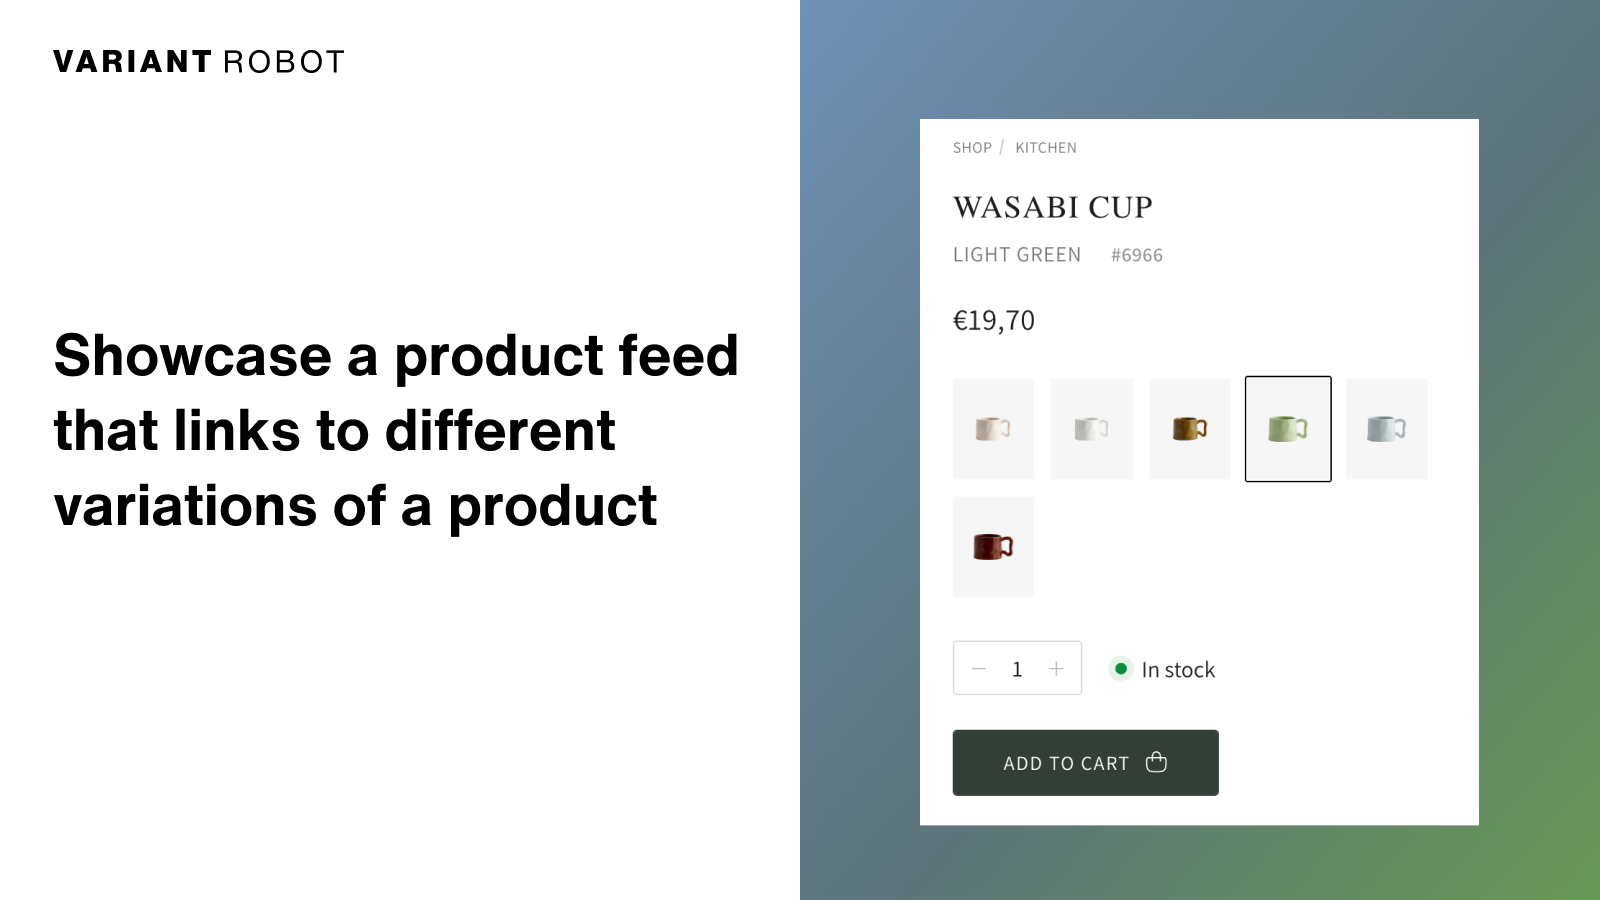 Customizable product variant image feed with easy integration